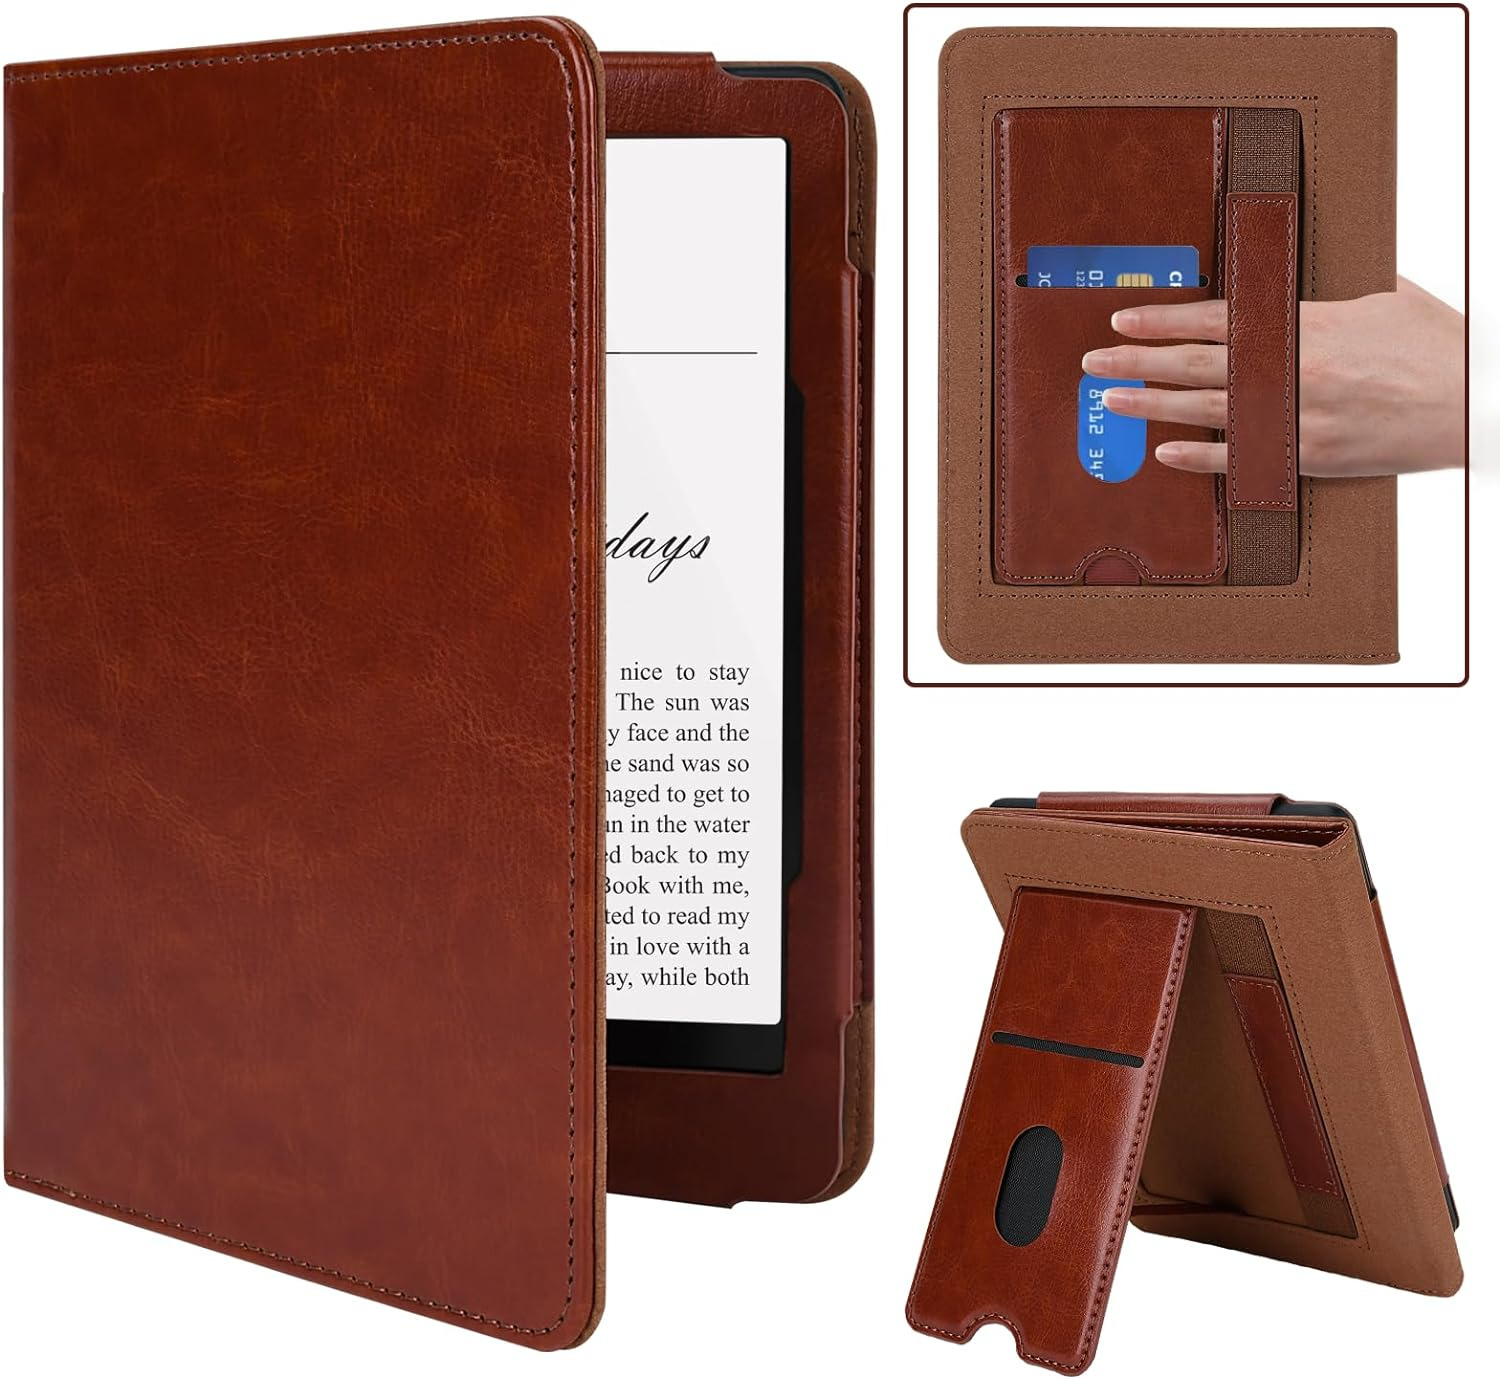 Case for Kindle Paperwhite - All New PU Leather Smart Cover with Auto Sleep W...